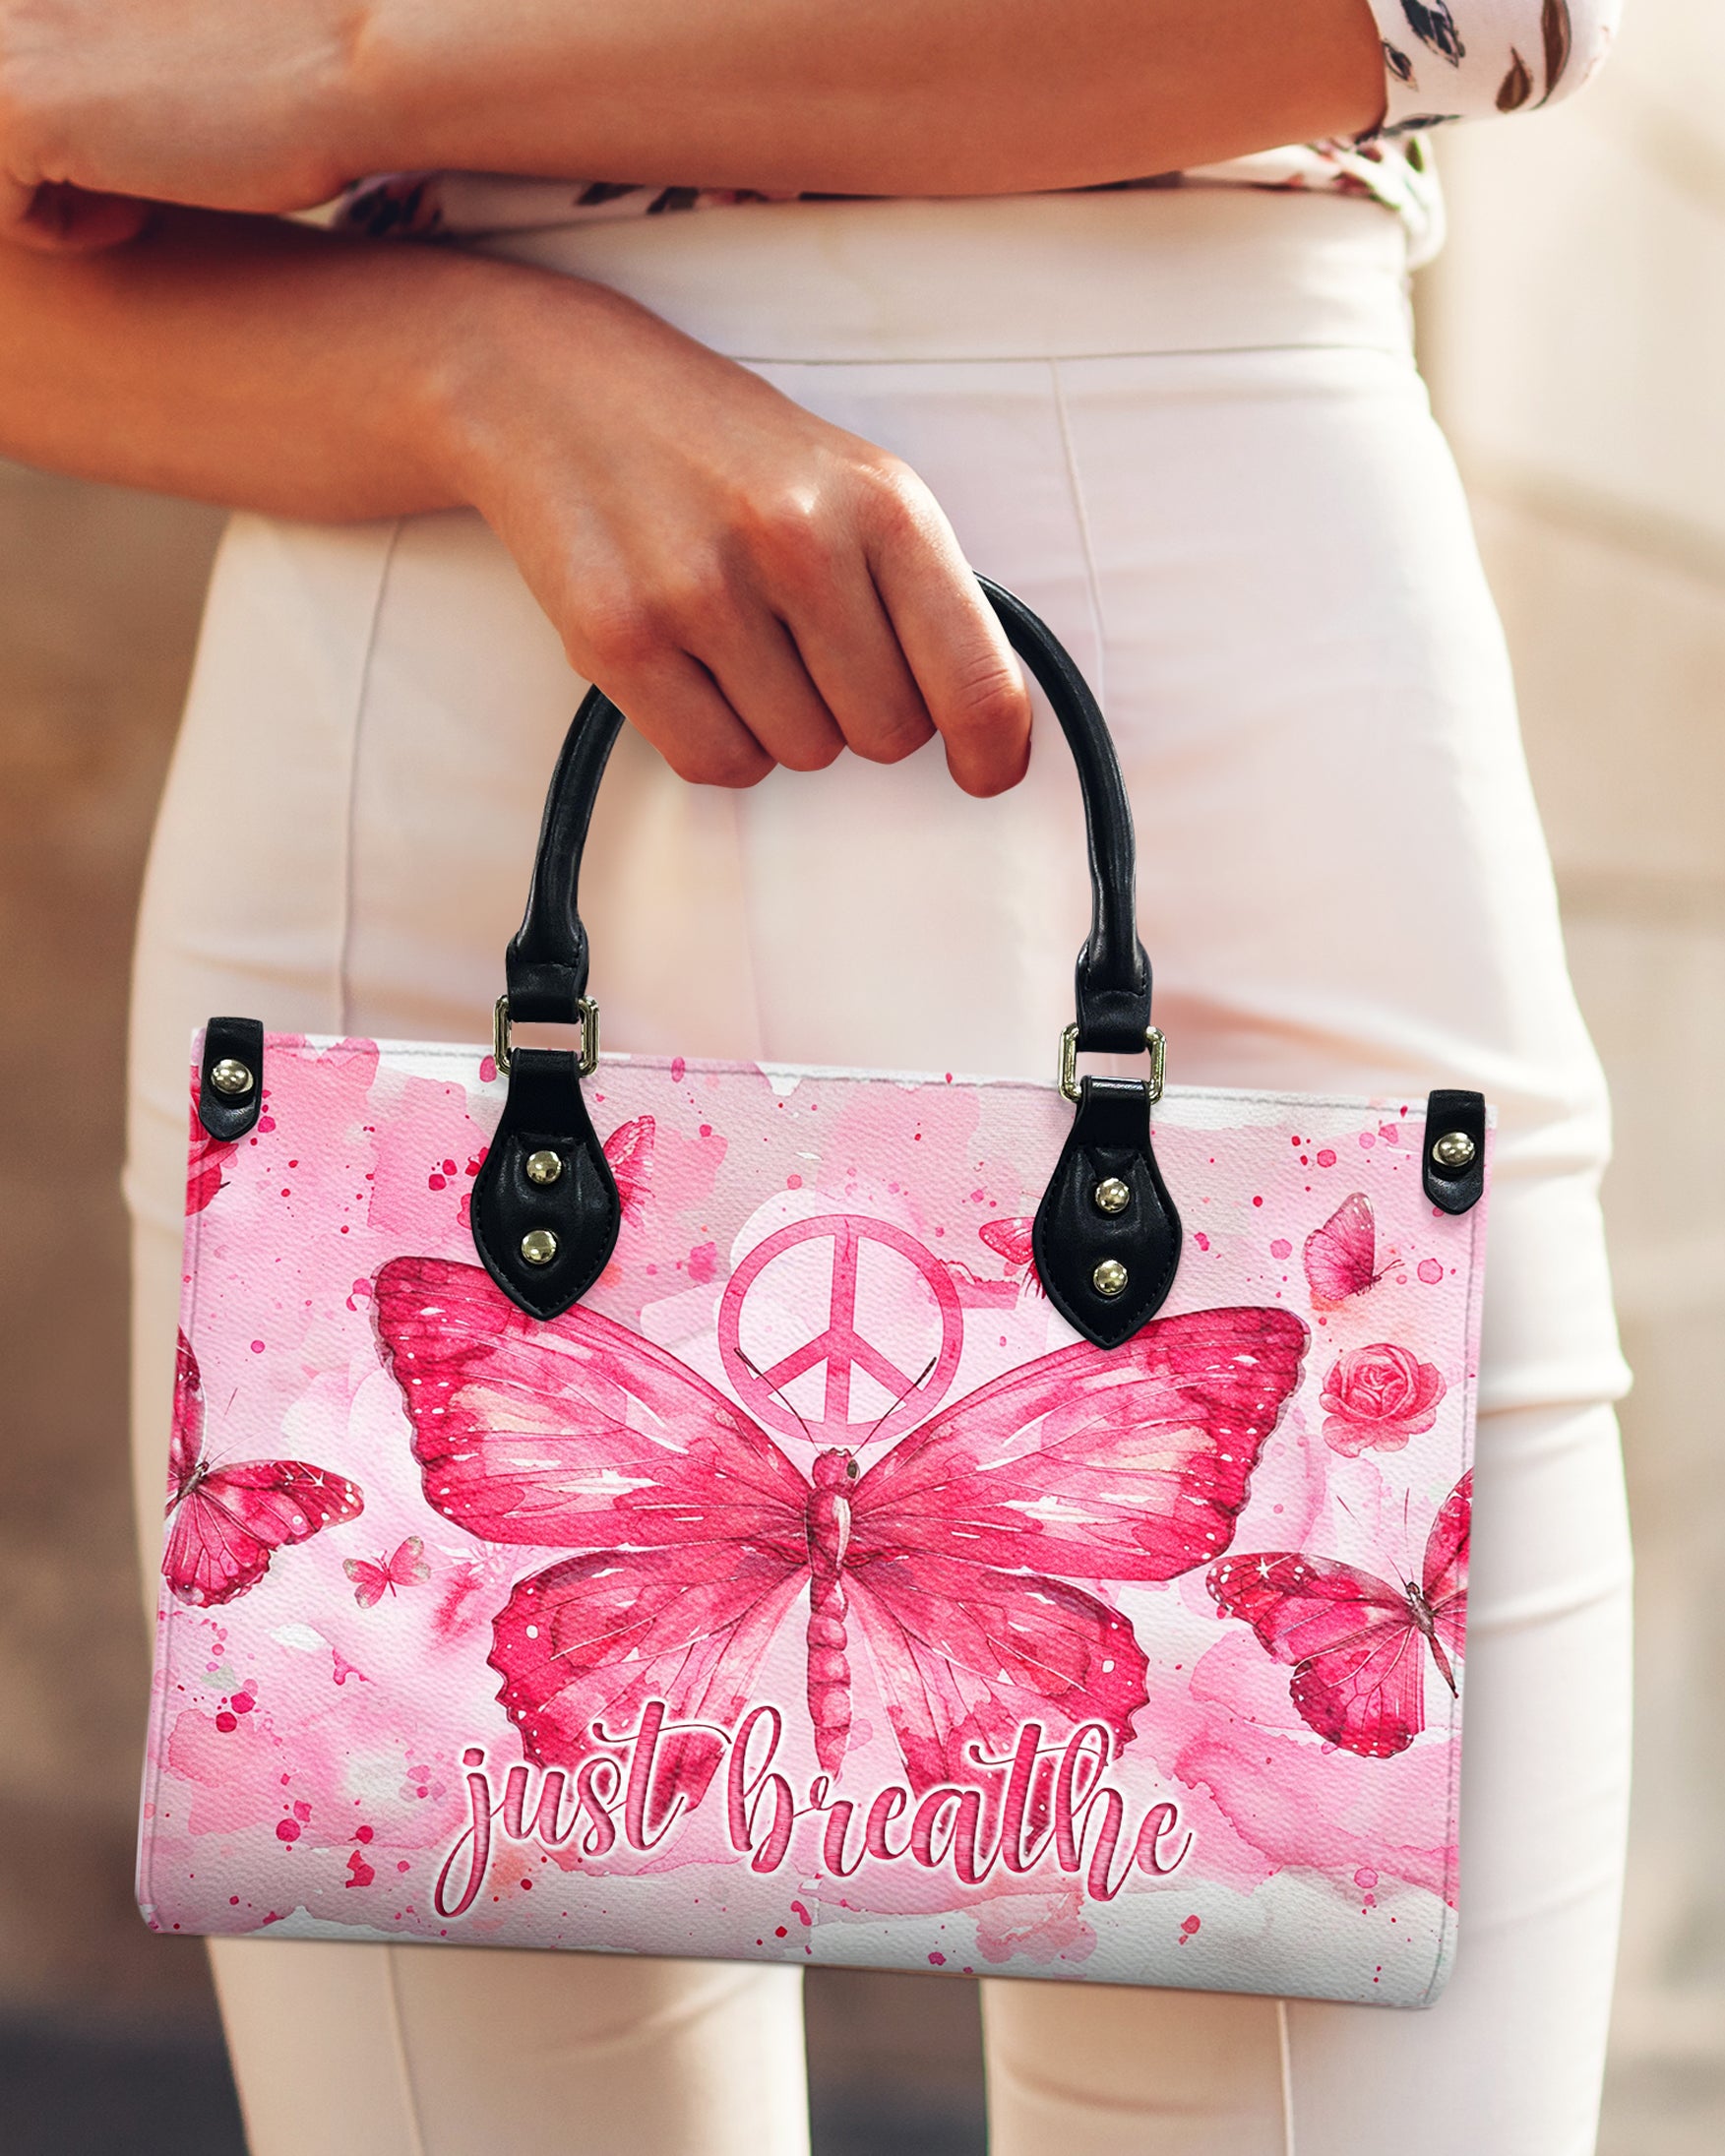 JUST BREATHE BUTTERFLY LEATHER HANDBAG - TYQY2903241